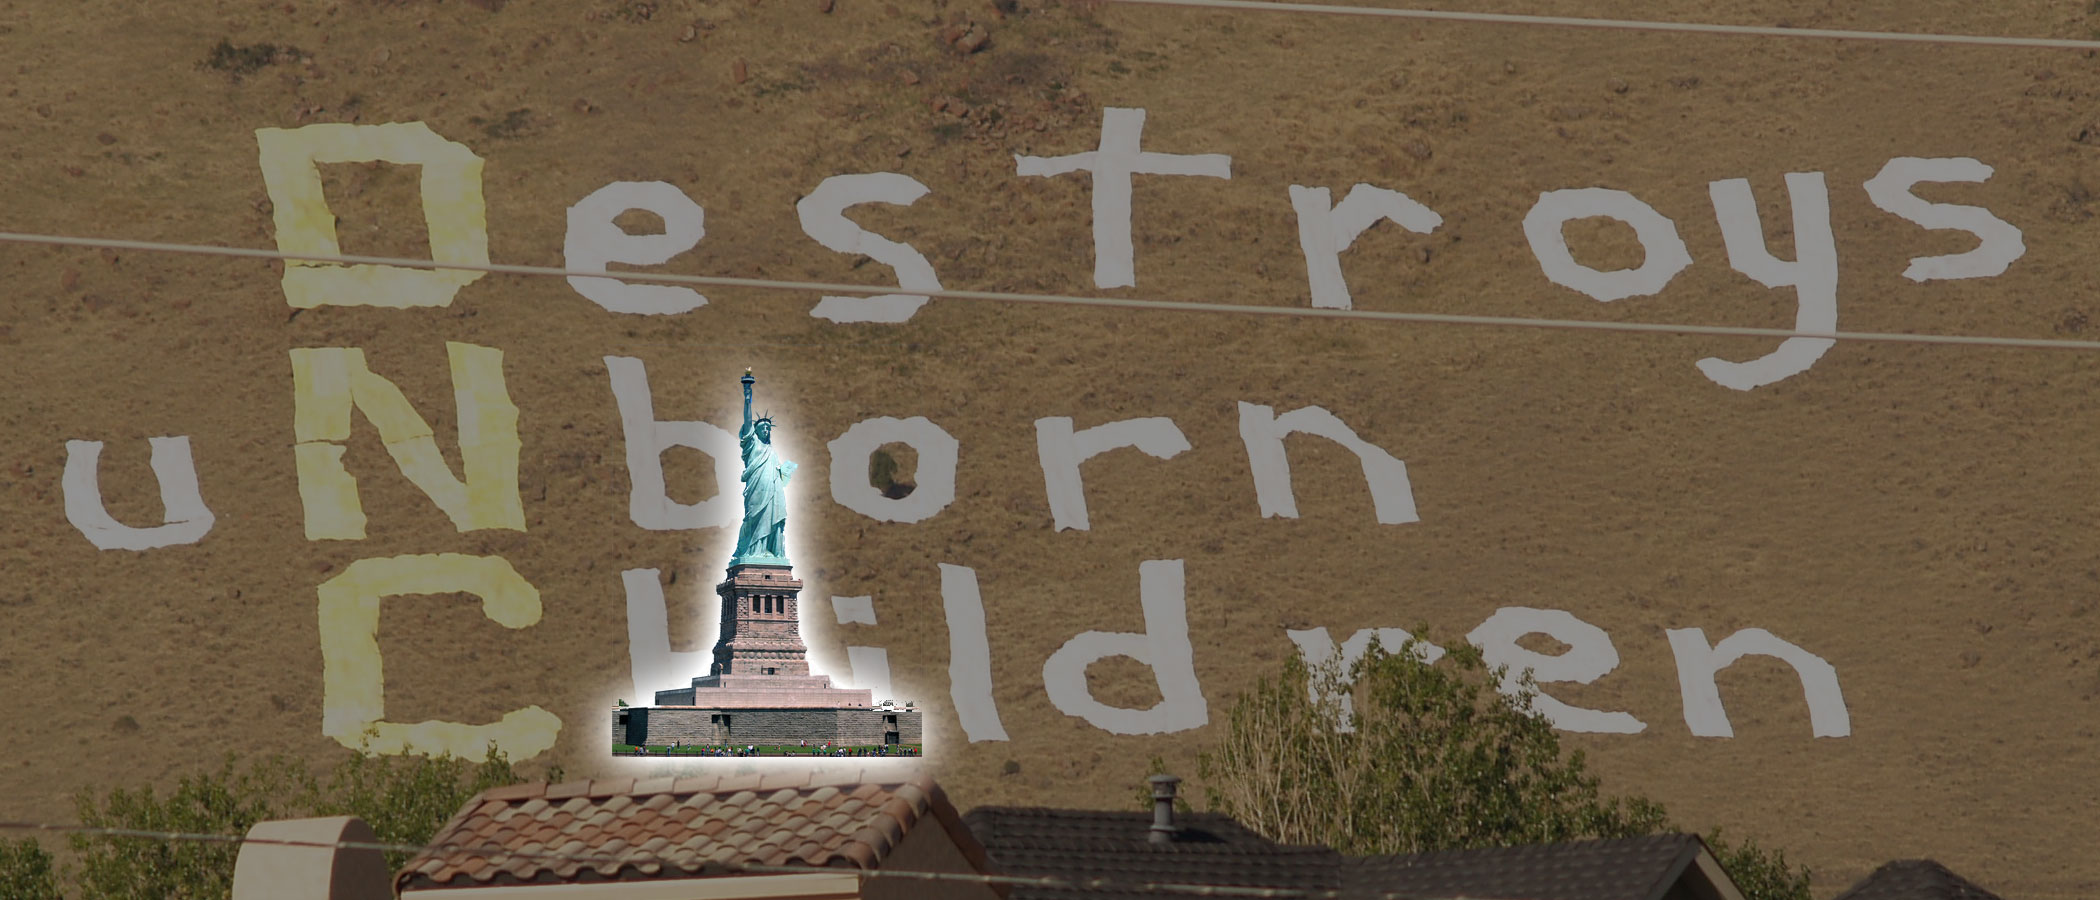 Size of world's largest protest sign by ARTL compared to the Statue of Liberty